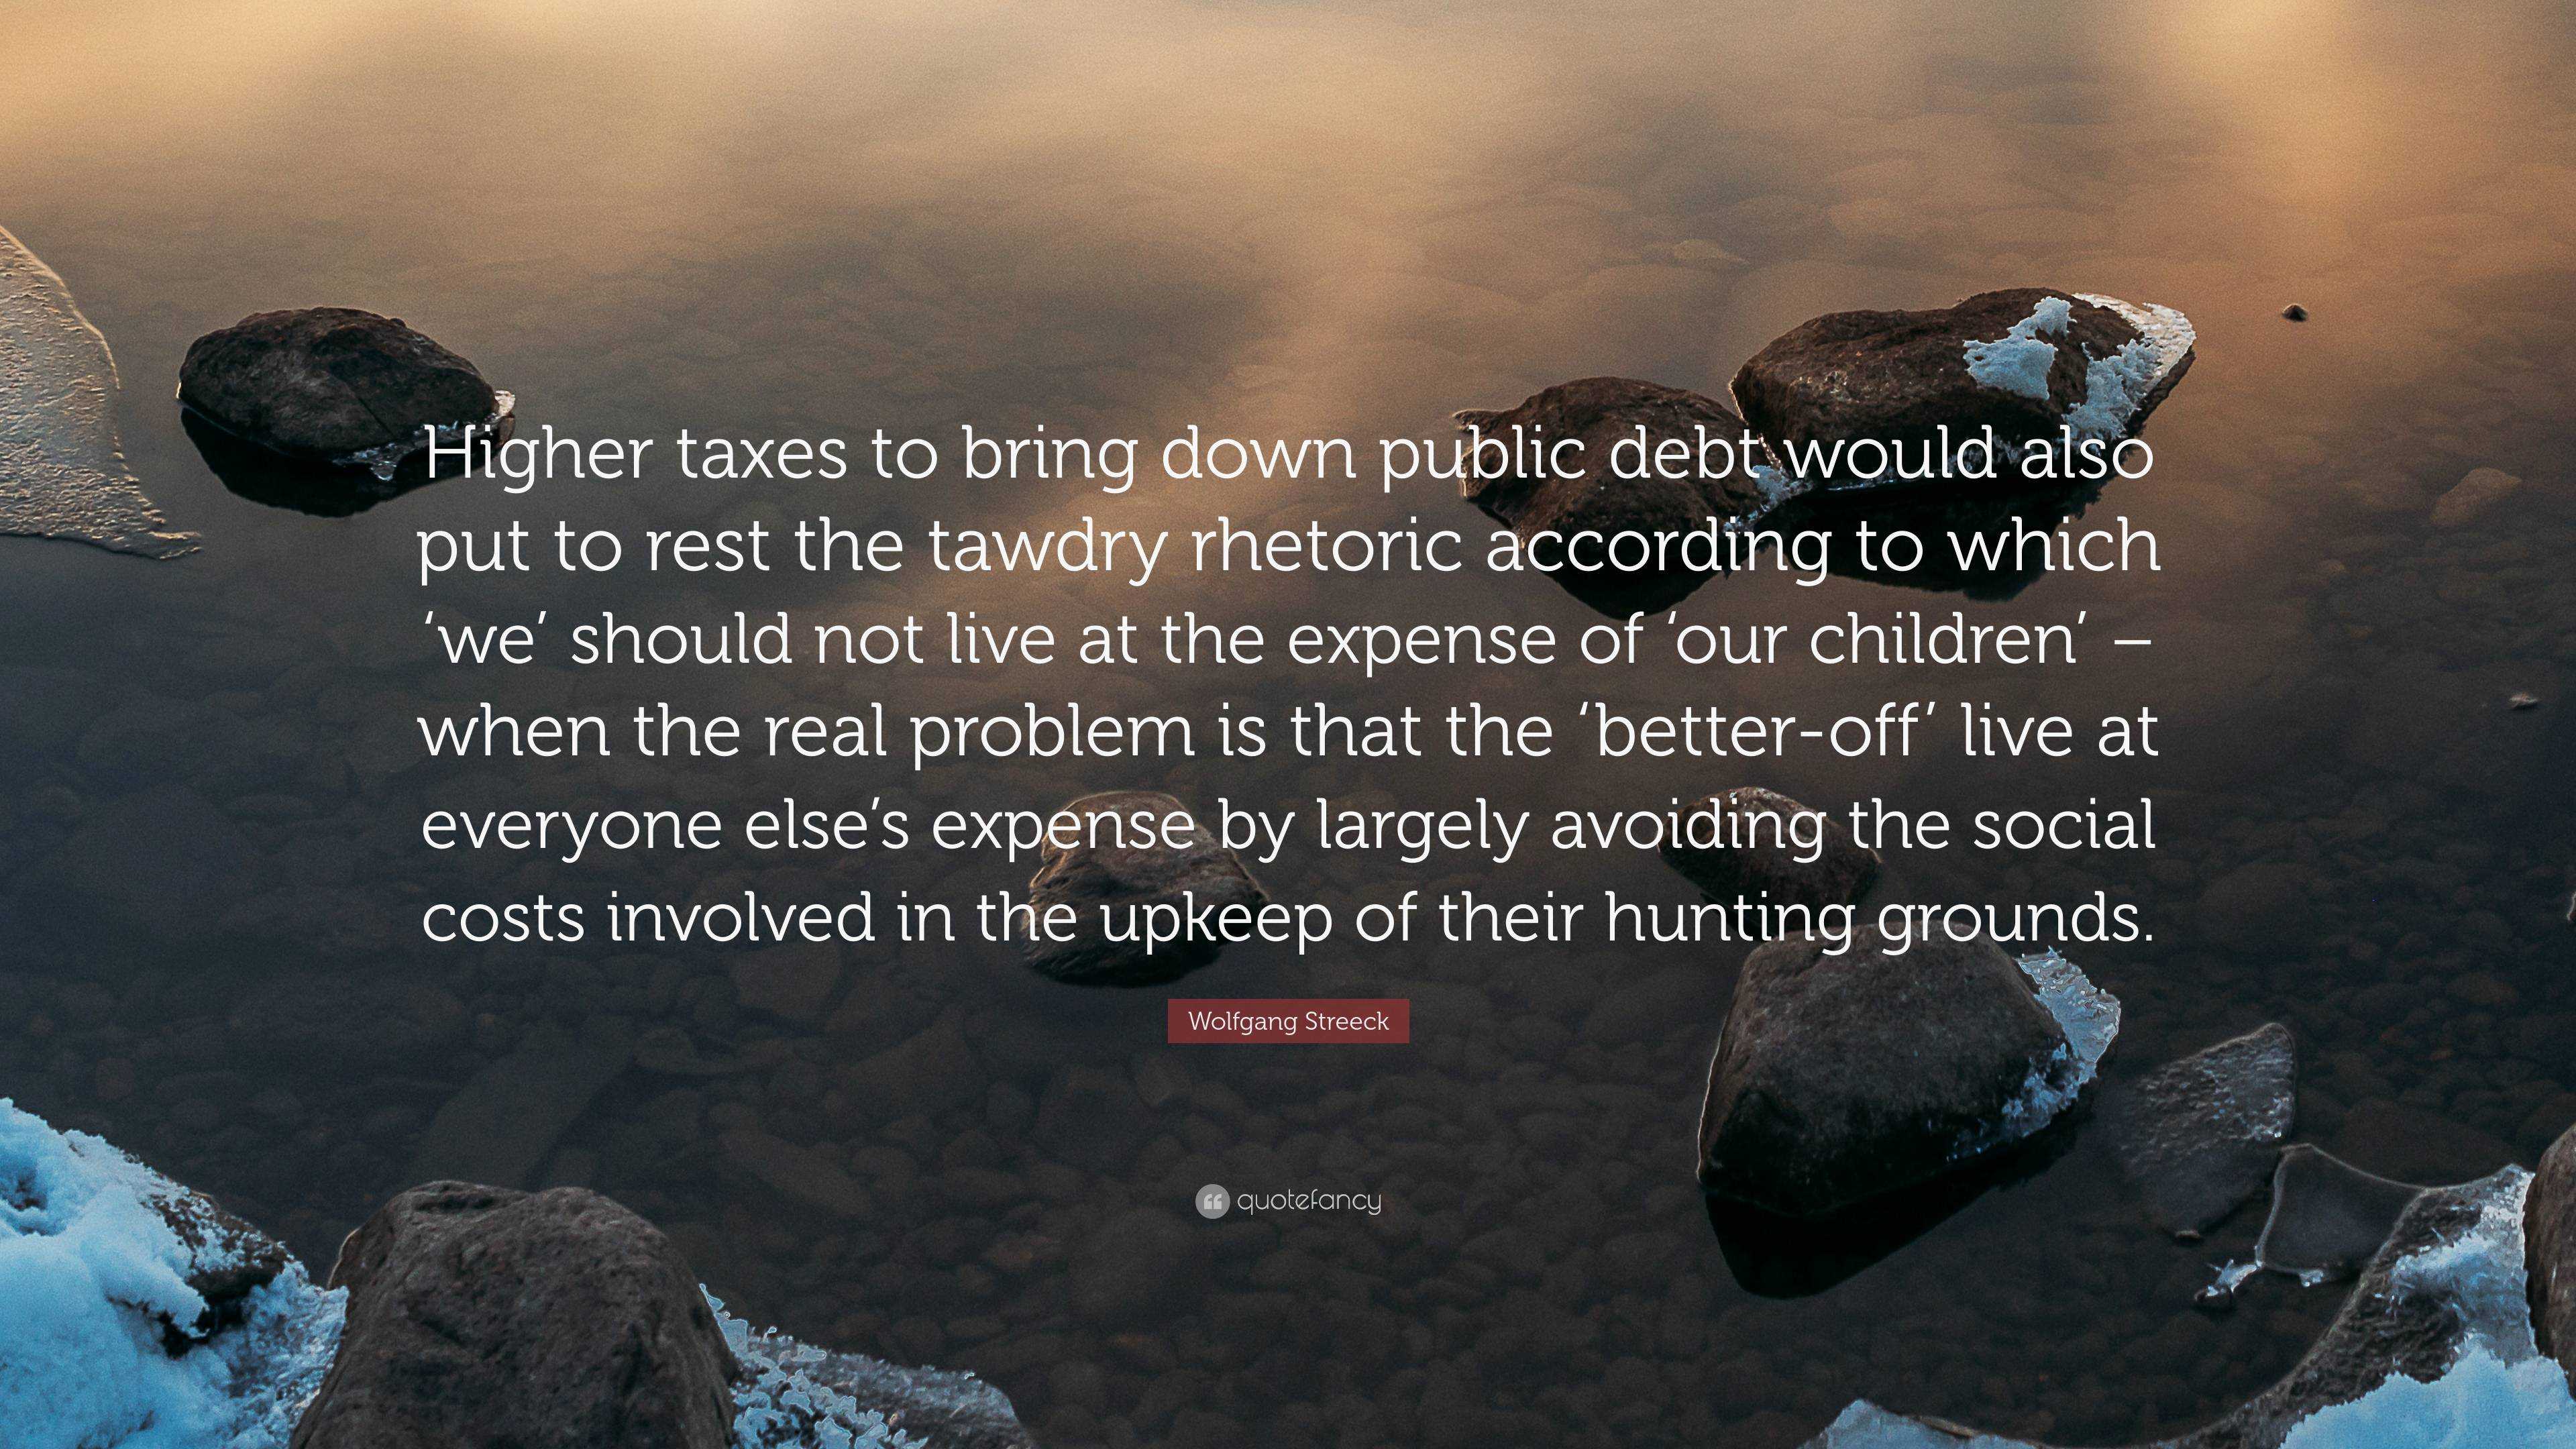 Wolfgang Streeck Quote: “Higher taxes to bring down public debt would also  put to rest the tawdry rhetoric according to which 'we' should not liv...”